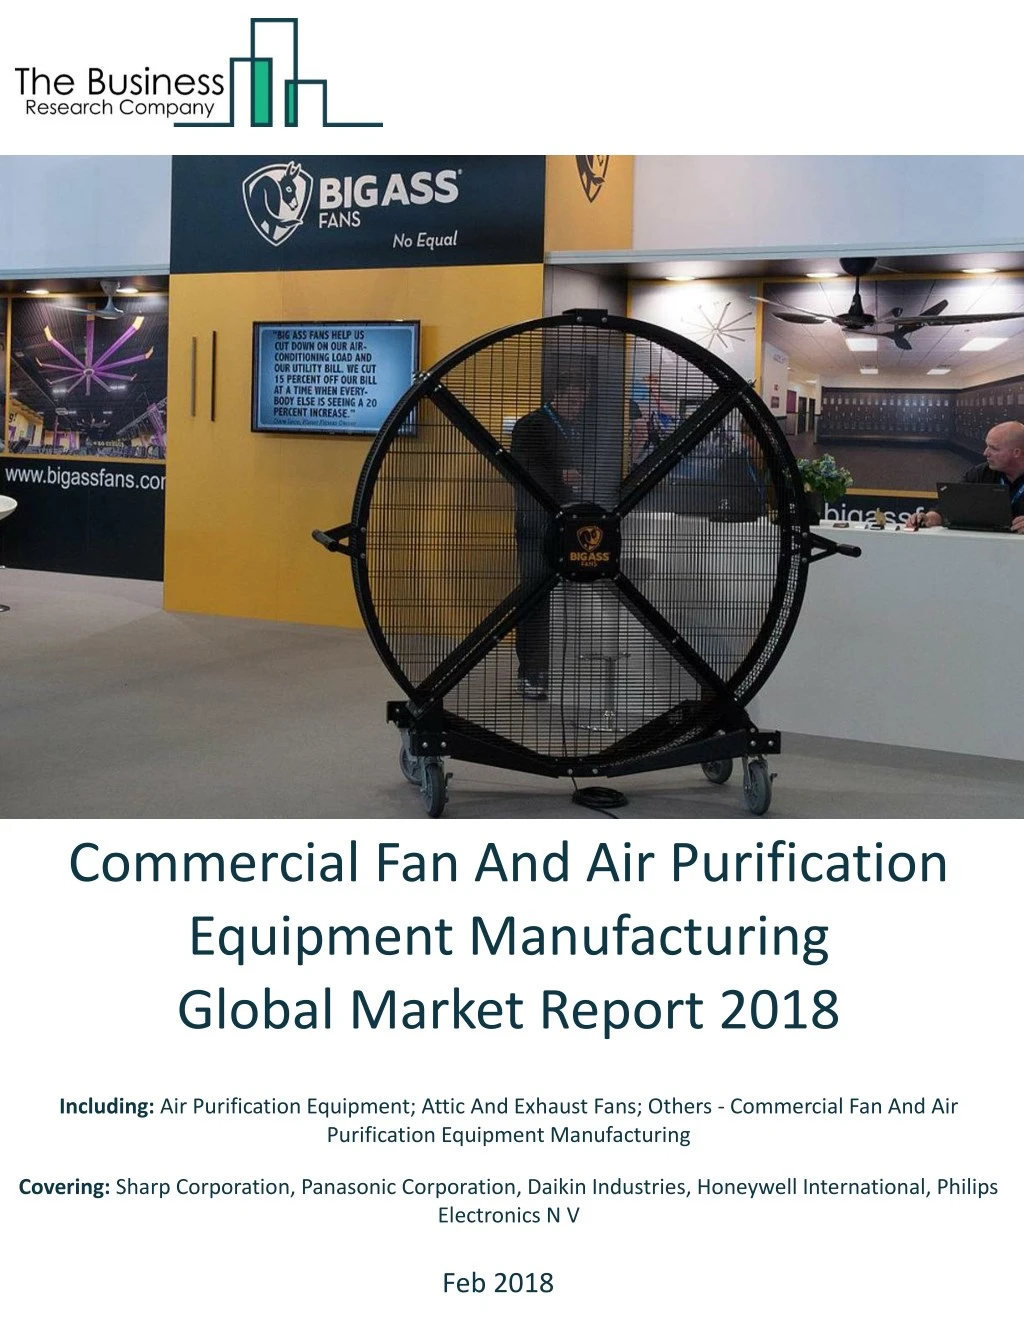 commercial fan and air purification equipment